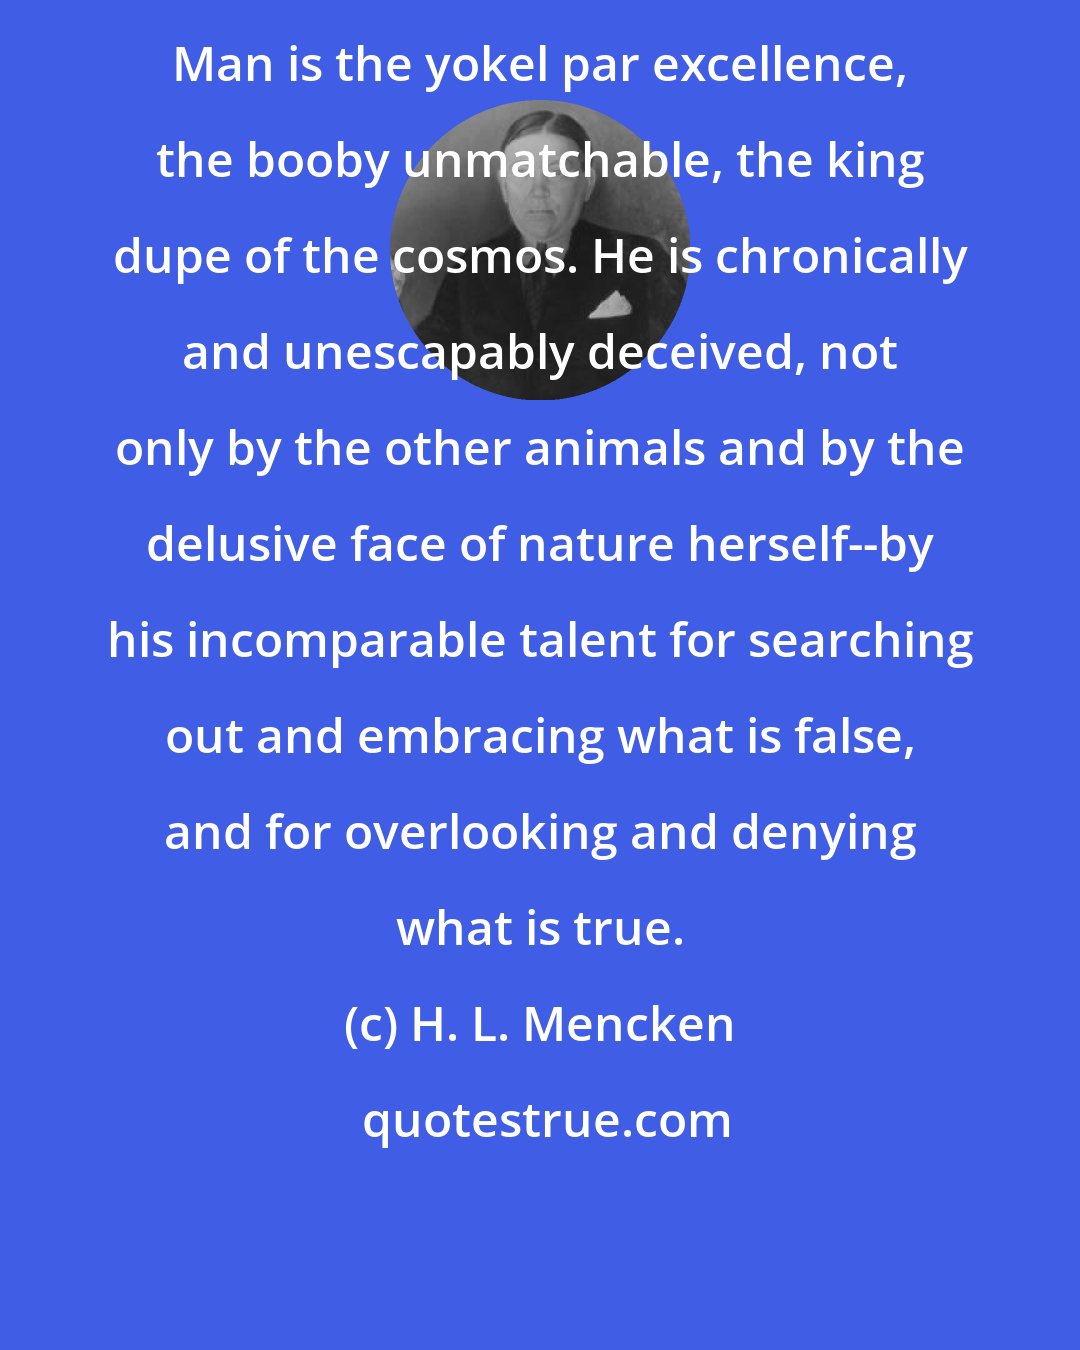 H. L. Mencken: Man is the yokel par excellence, the booby unmatchable, the king dupe of the cosmos. He is chronically and unescapably deceived, not only by the other animals and by the delusive face of nature herself--by his incomparable talent for searching out and embracing what is false, and for overlooking and denying what is true.